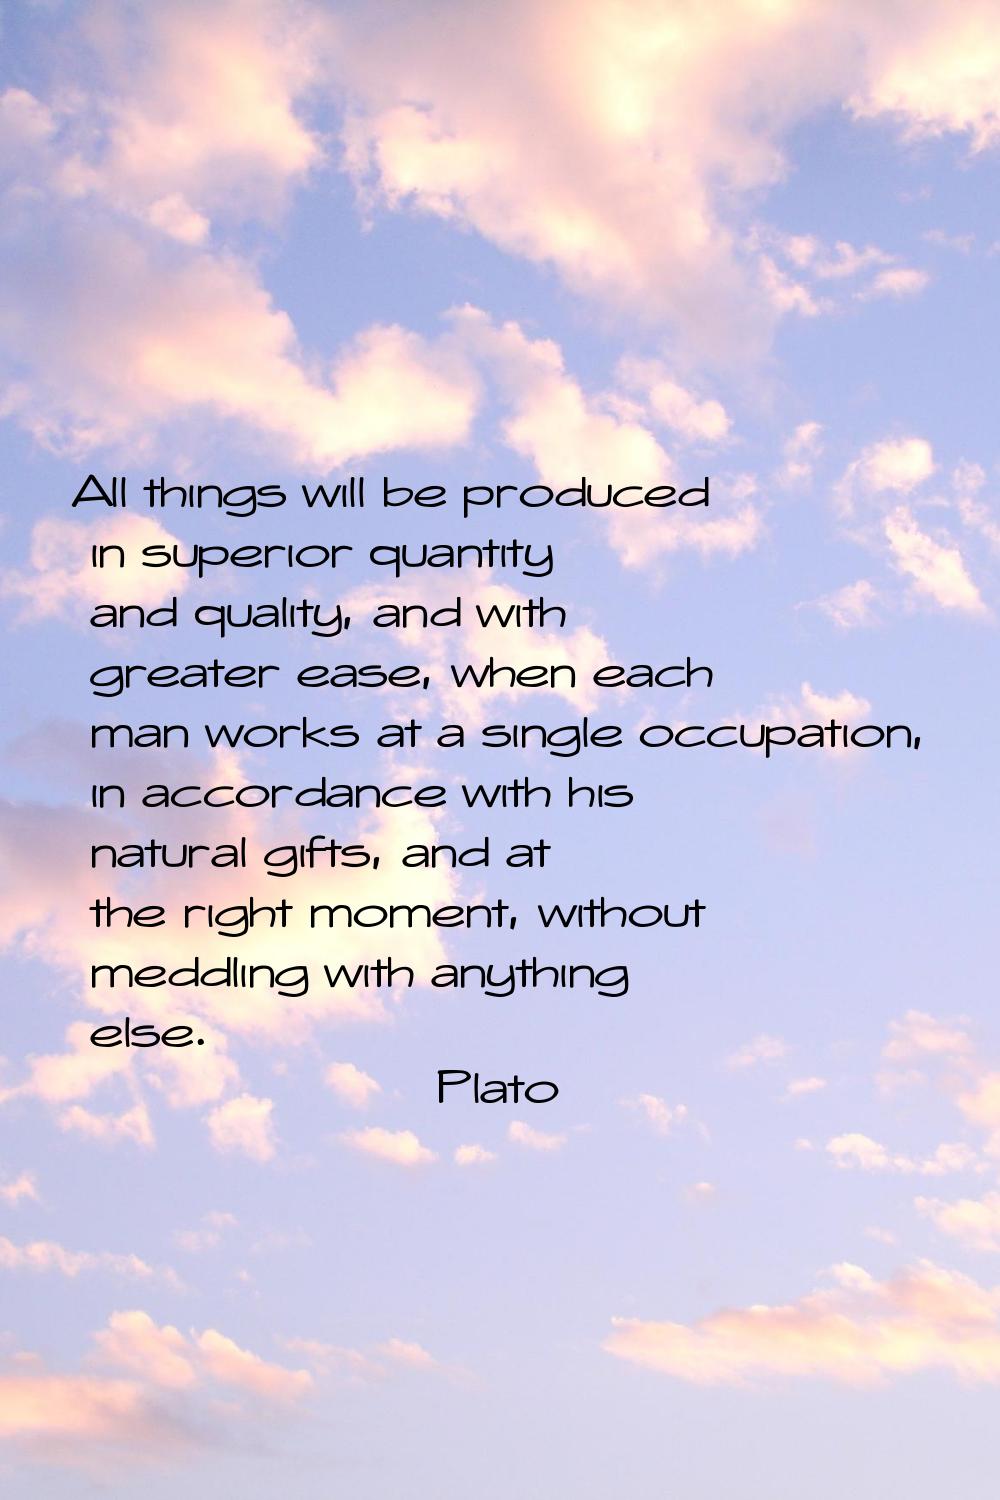 All things will be produced in superior quantity and quality, and with greater ease, when each man 